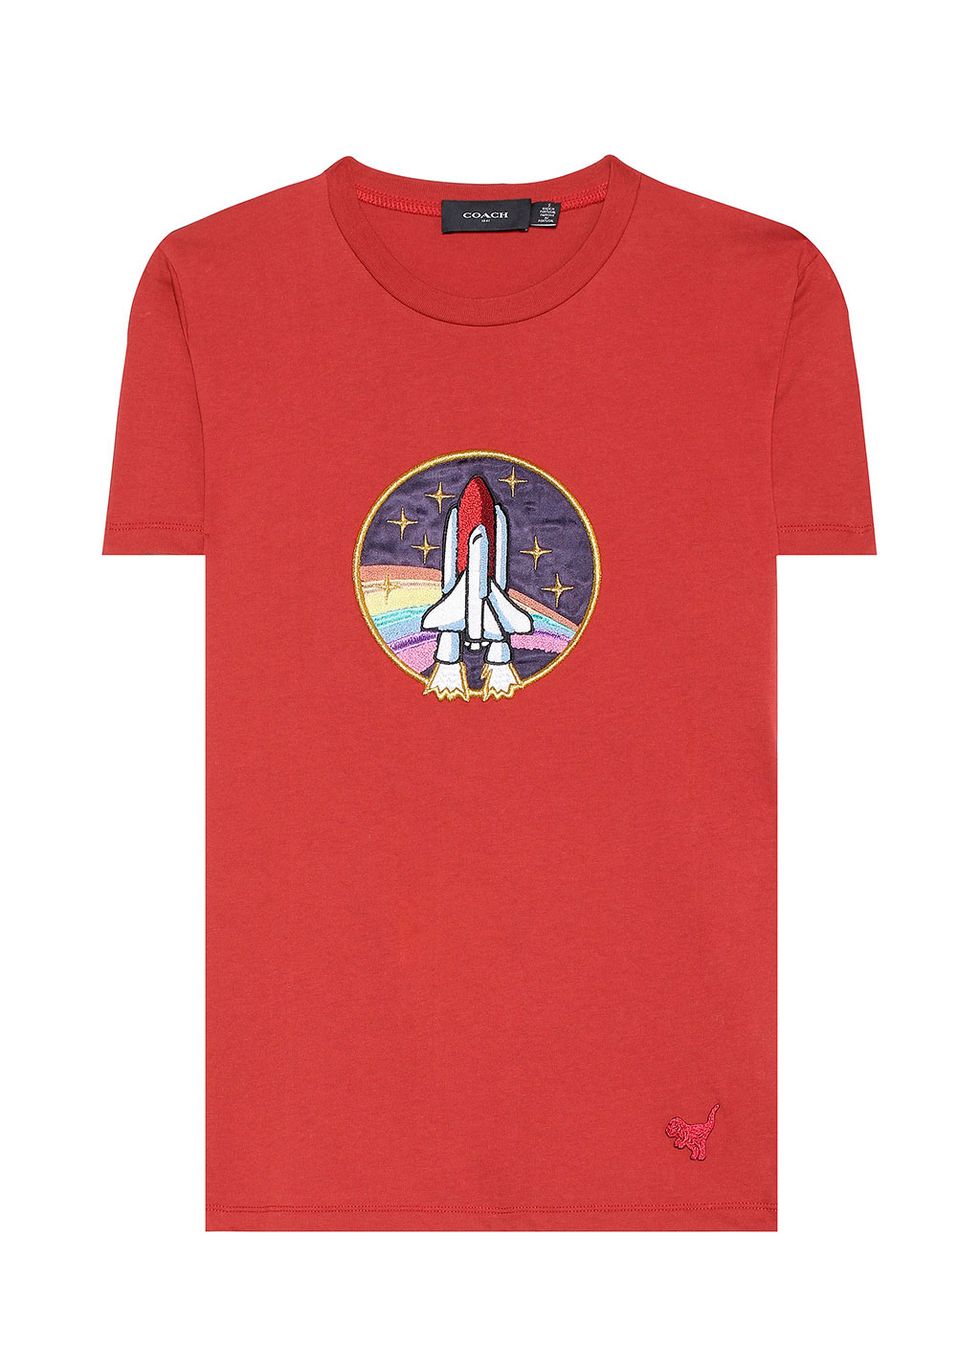 T-shirt, Clothing, Active shirt, White, Sleeve, Red, Product, Orange, Top, Font, 